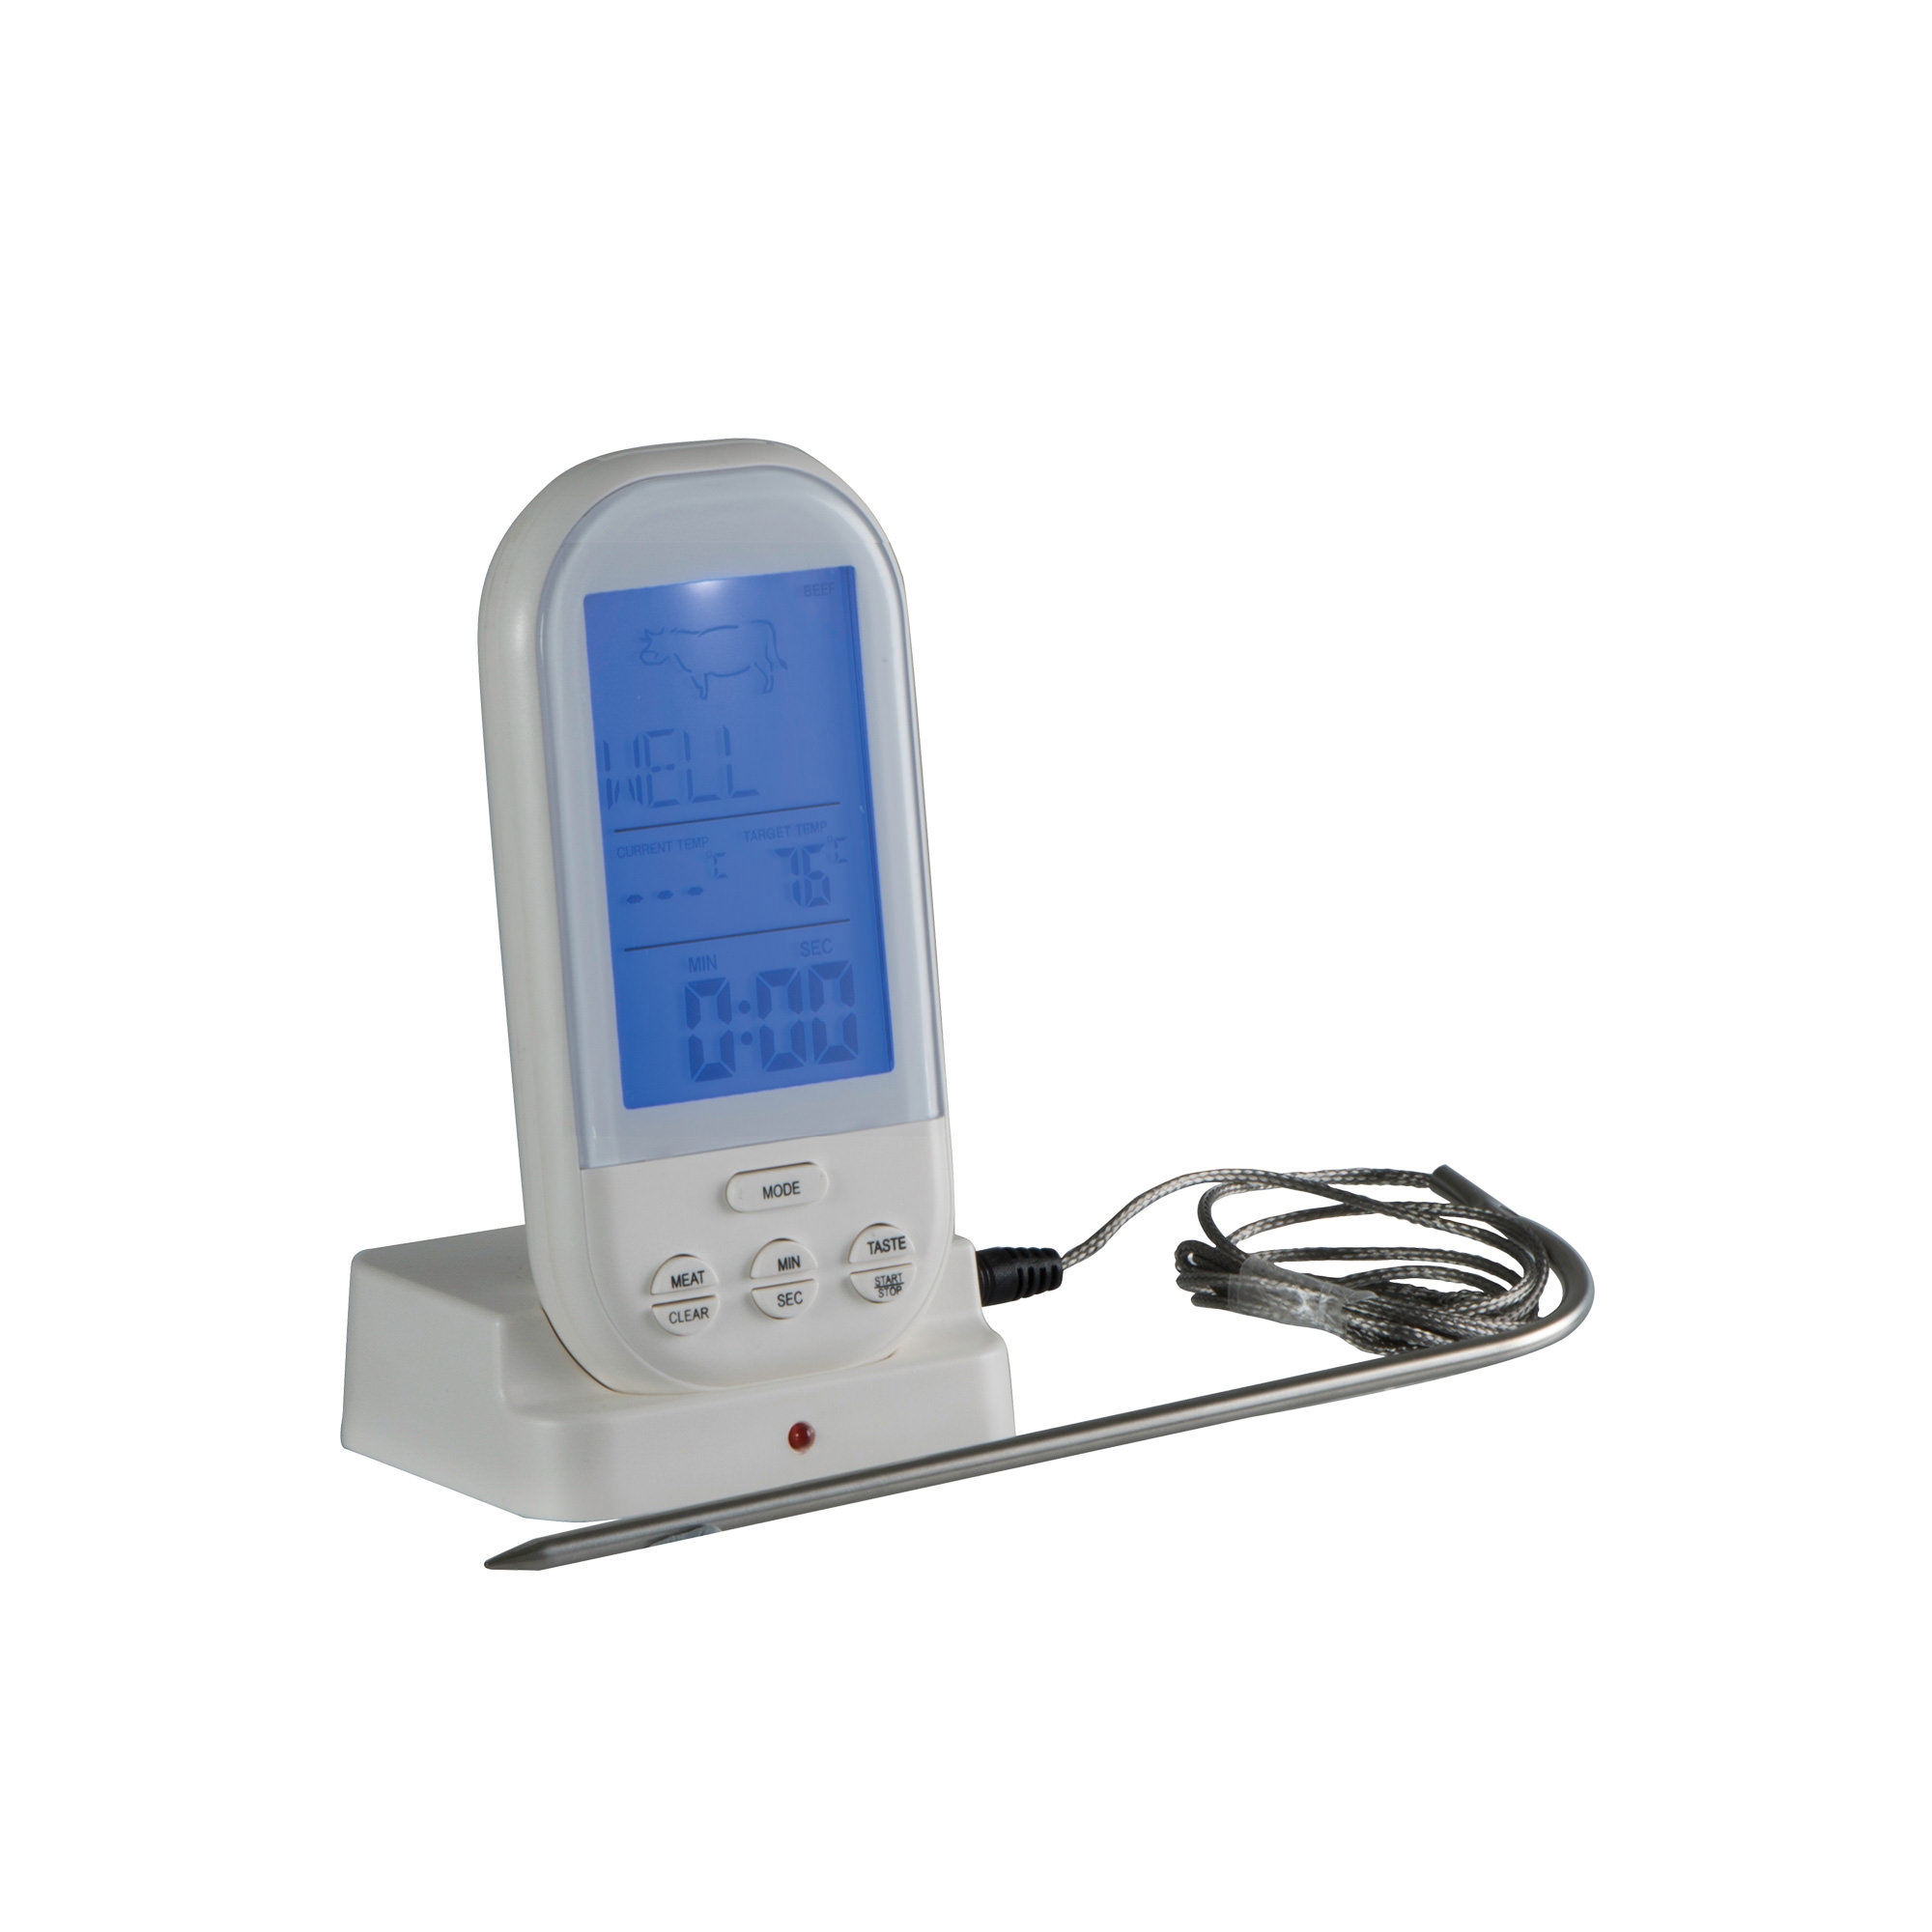 Avanti Digital Cooking Thermometer Image 1